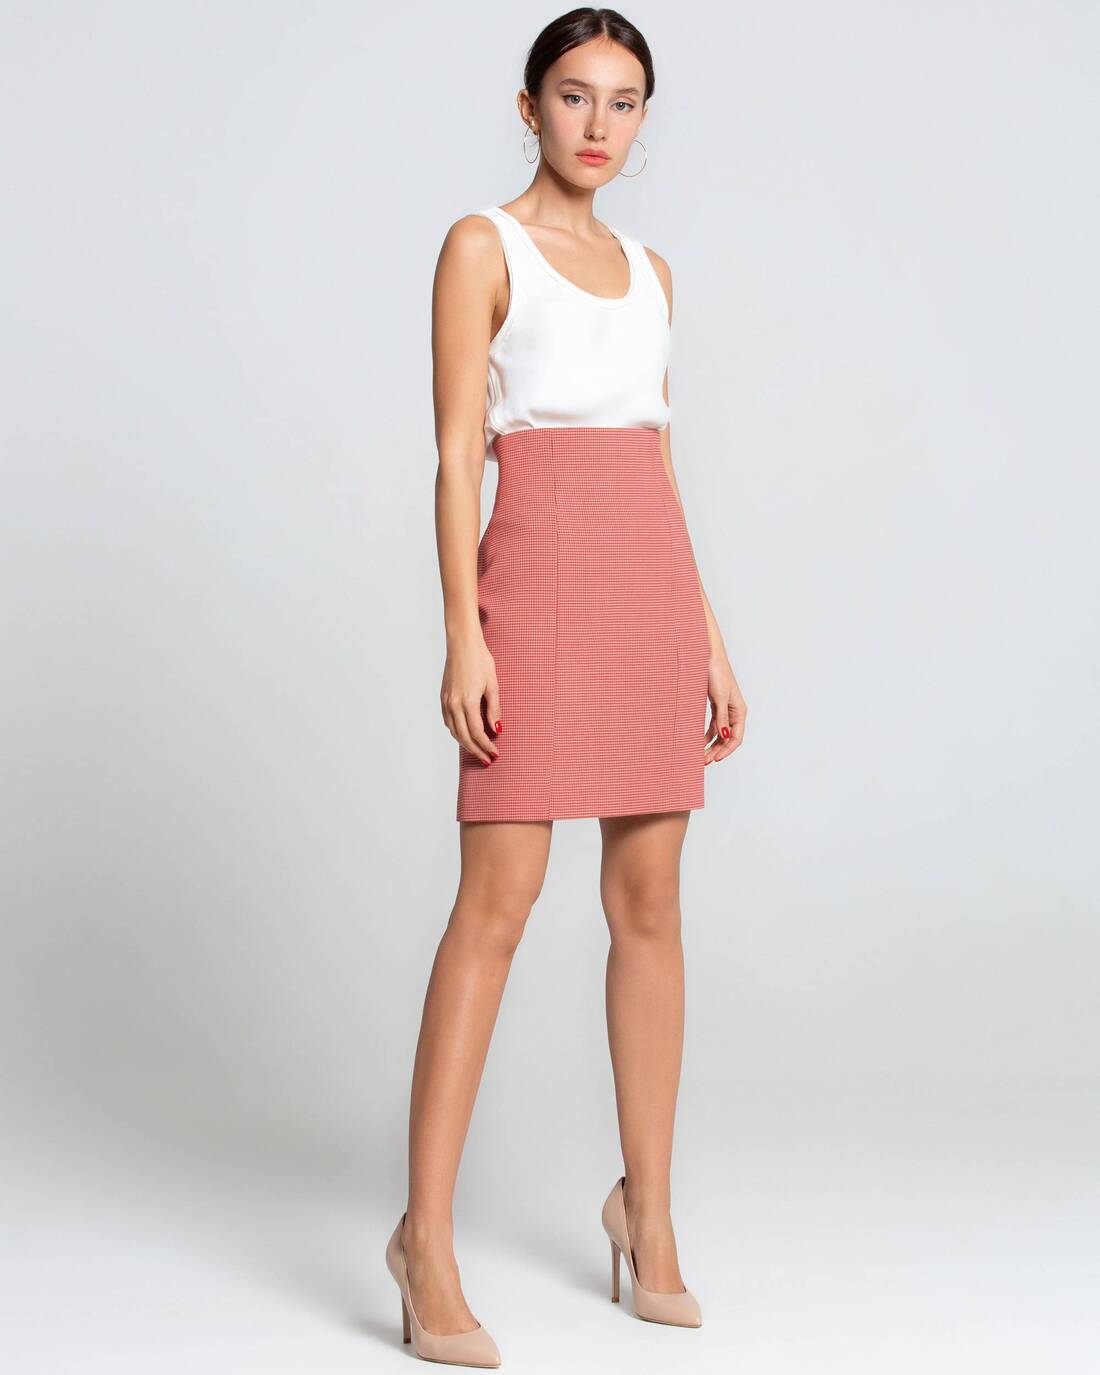 Mini skirt with relief details